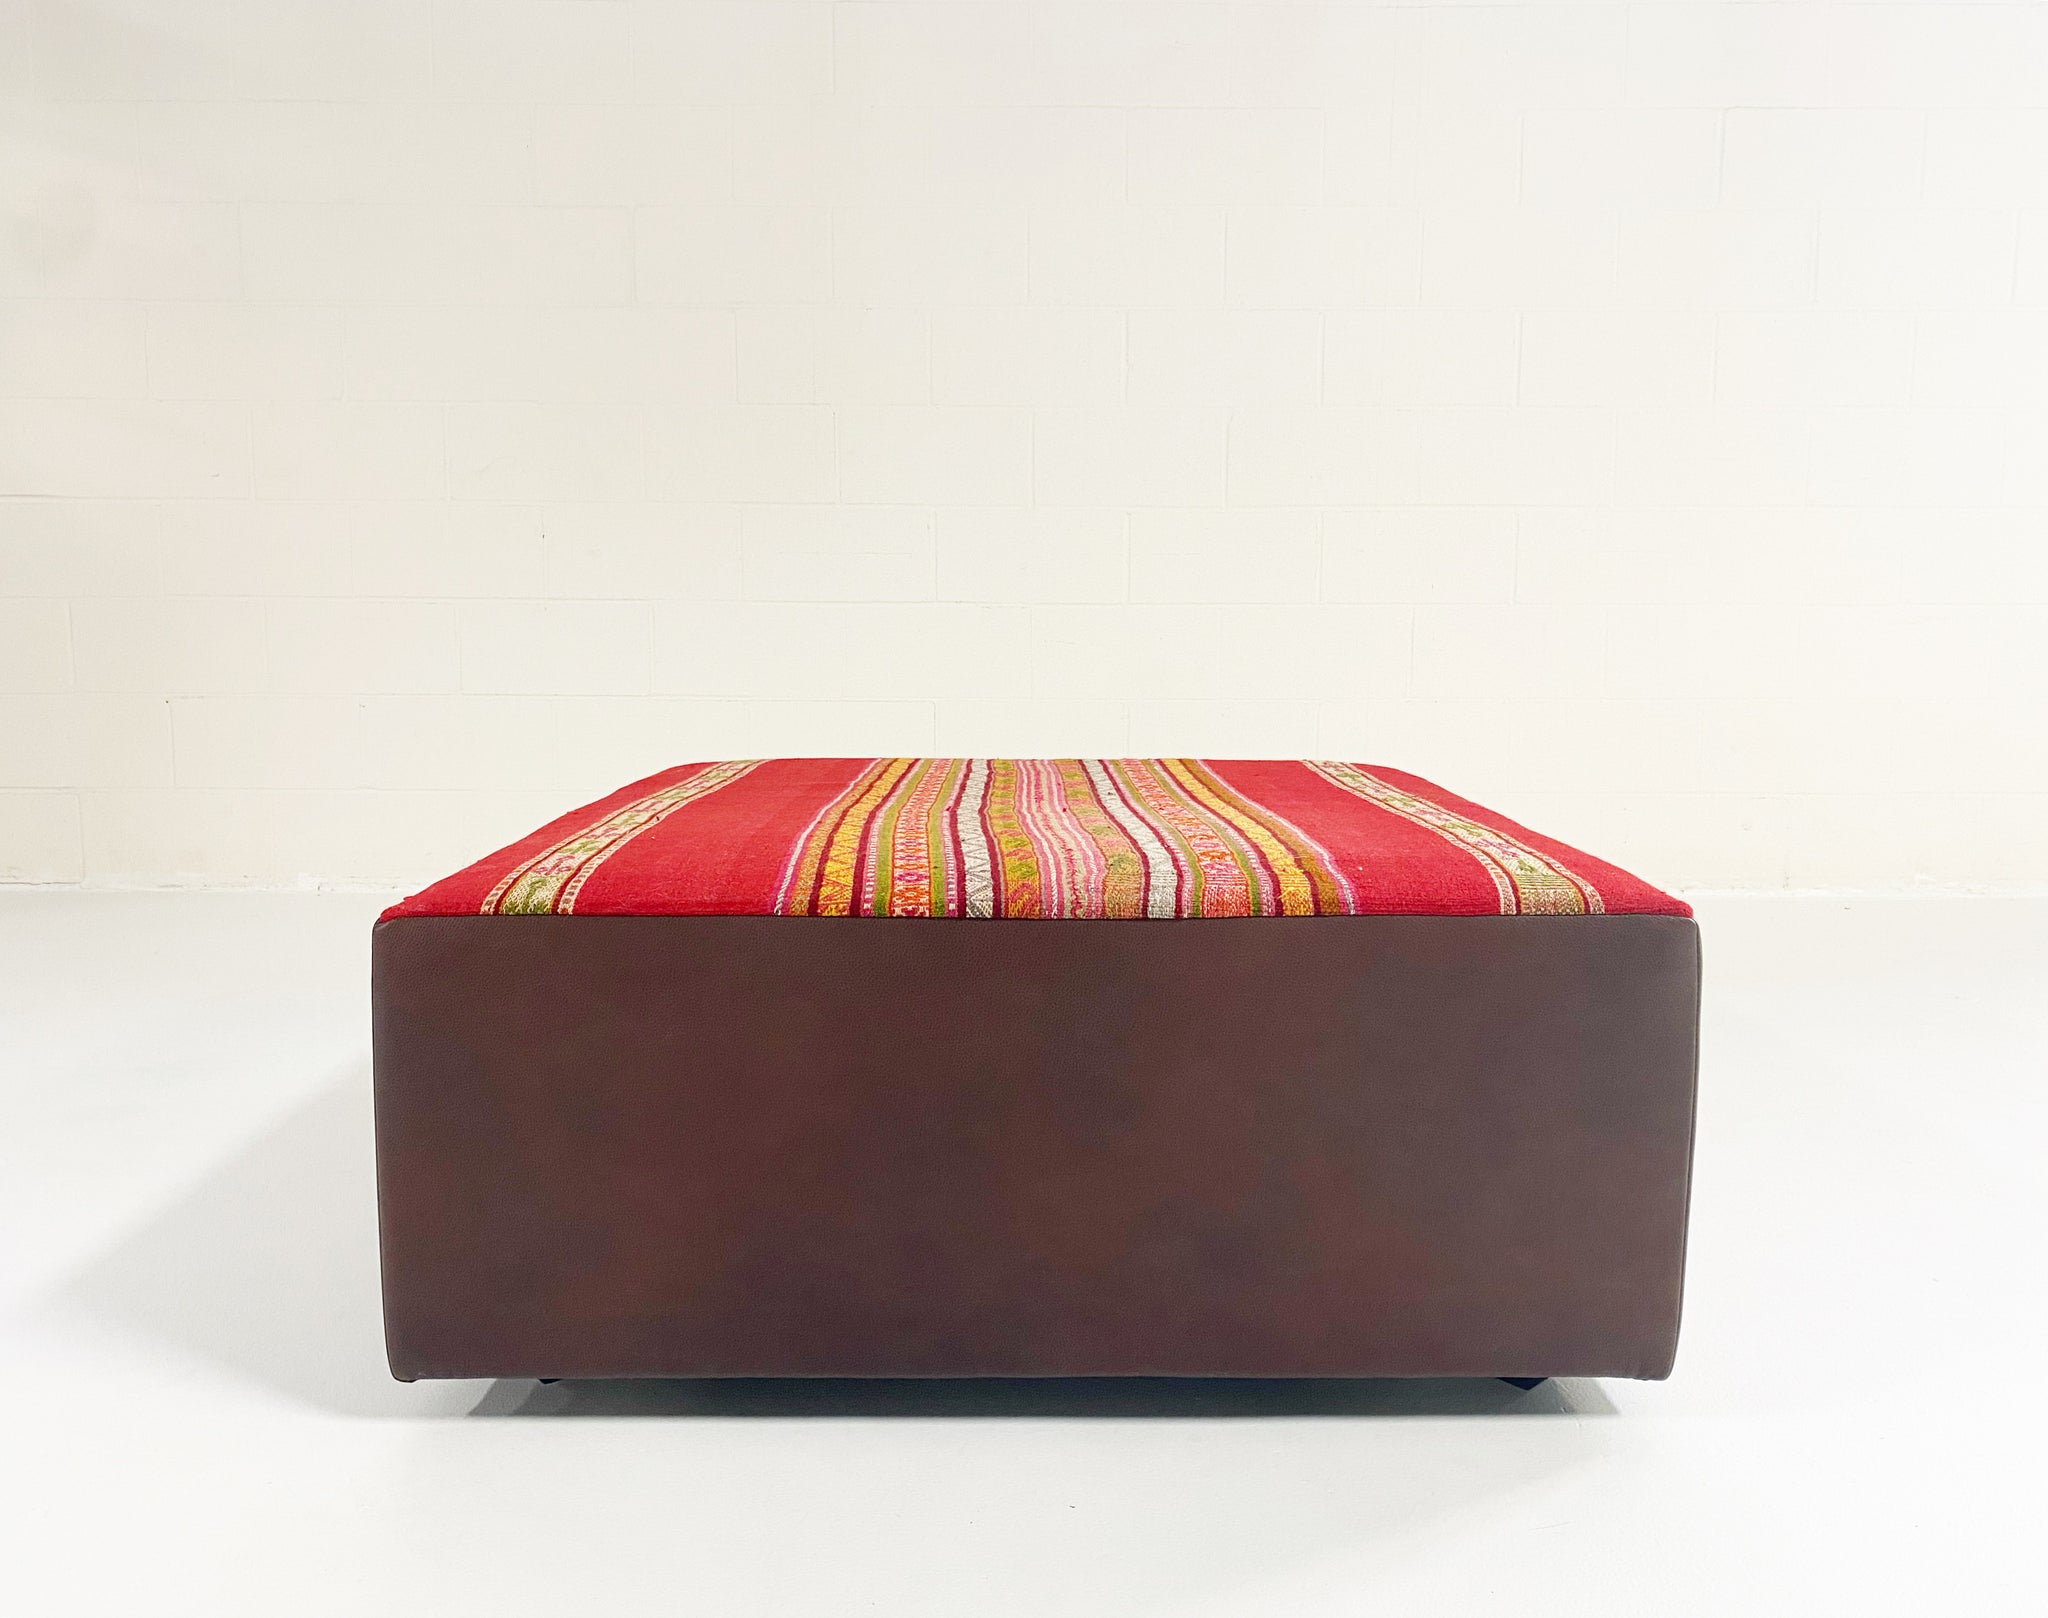 One-of-a-Kind Ottoman with Vintage Peruvian Textile, Red